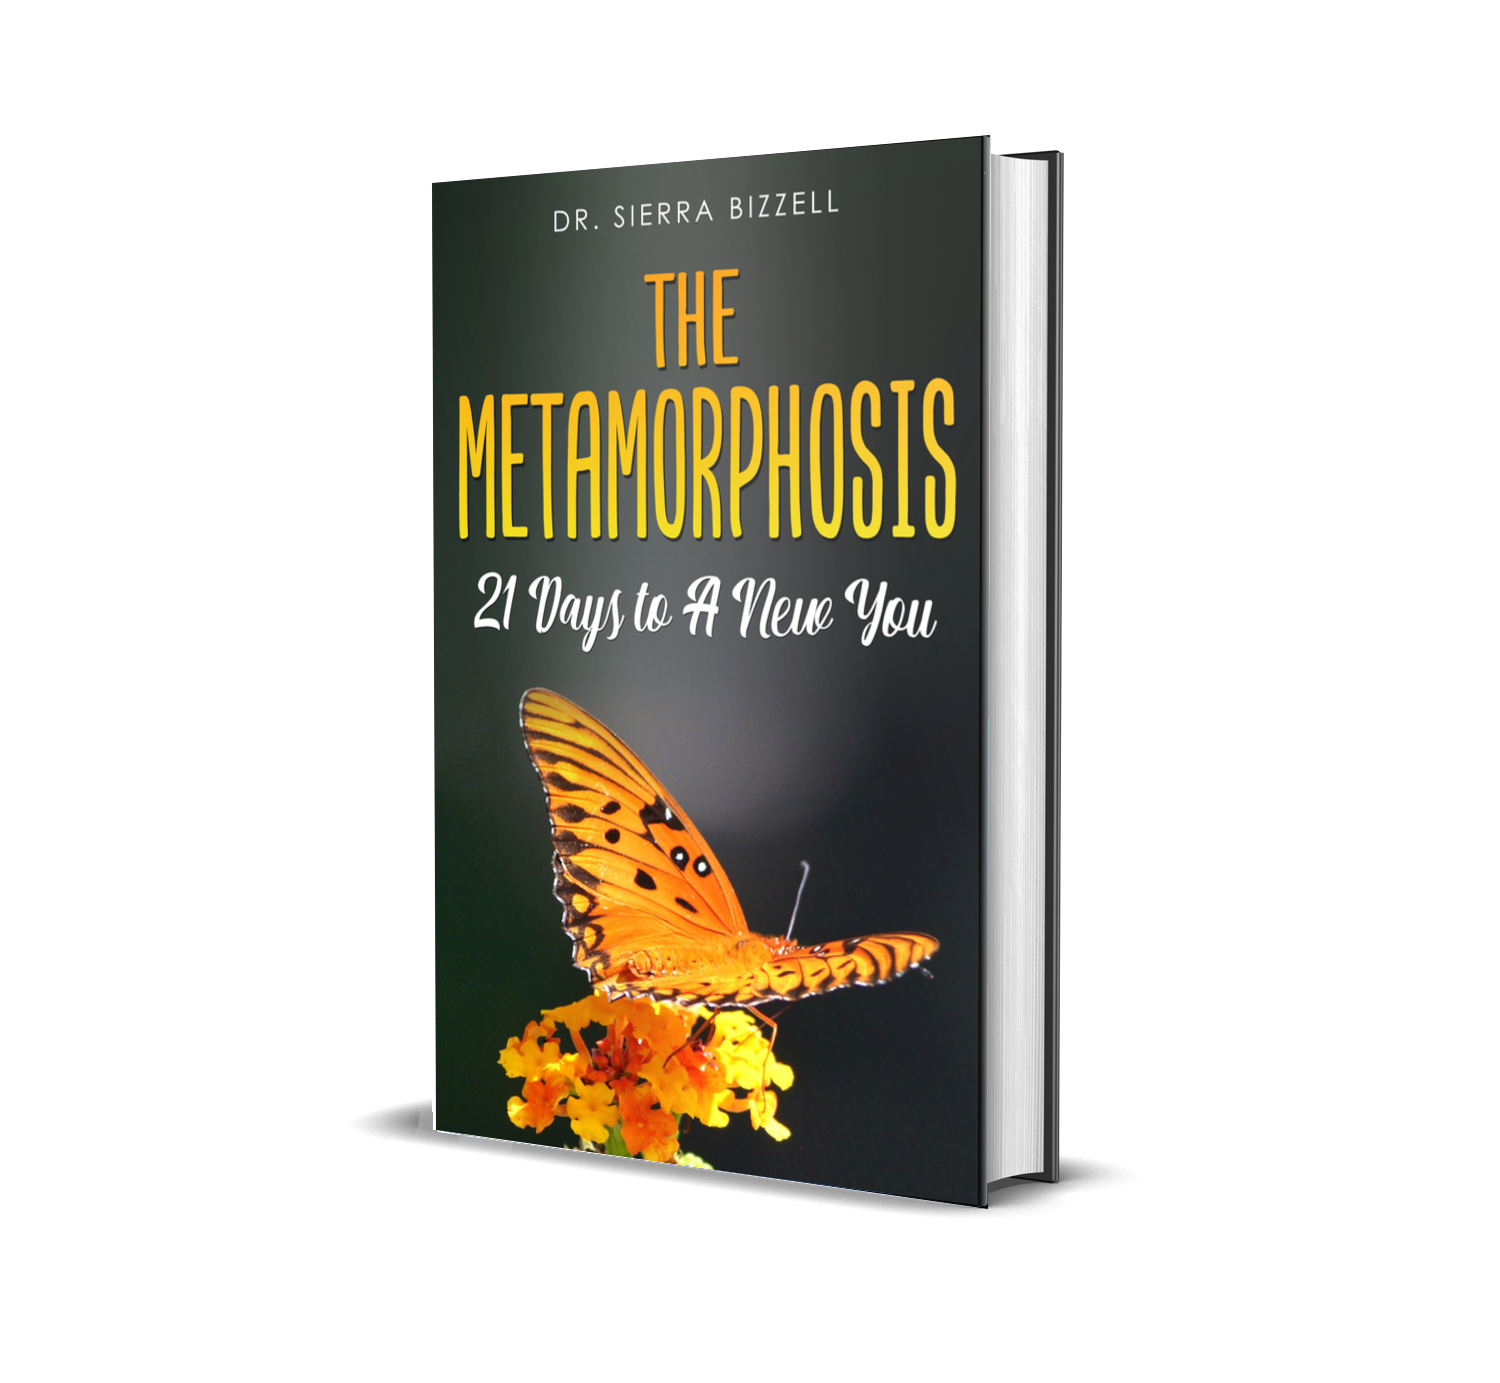 The Metamorphosis: 21 Days to A New You (Ebook)